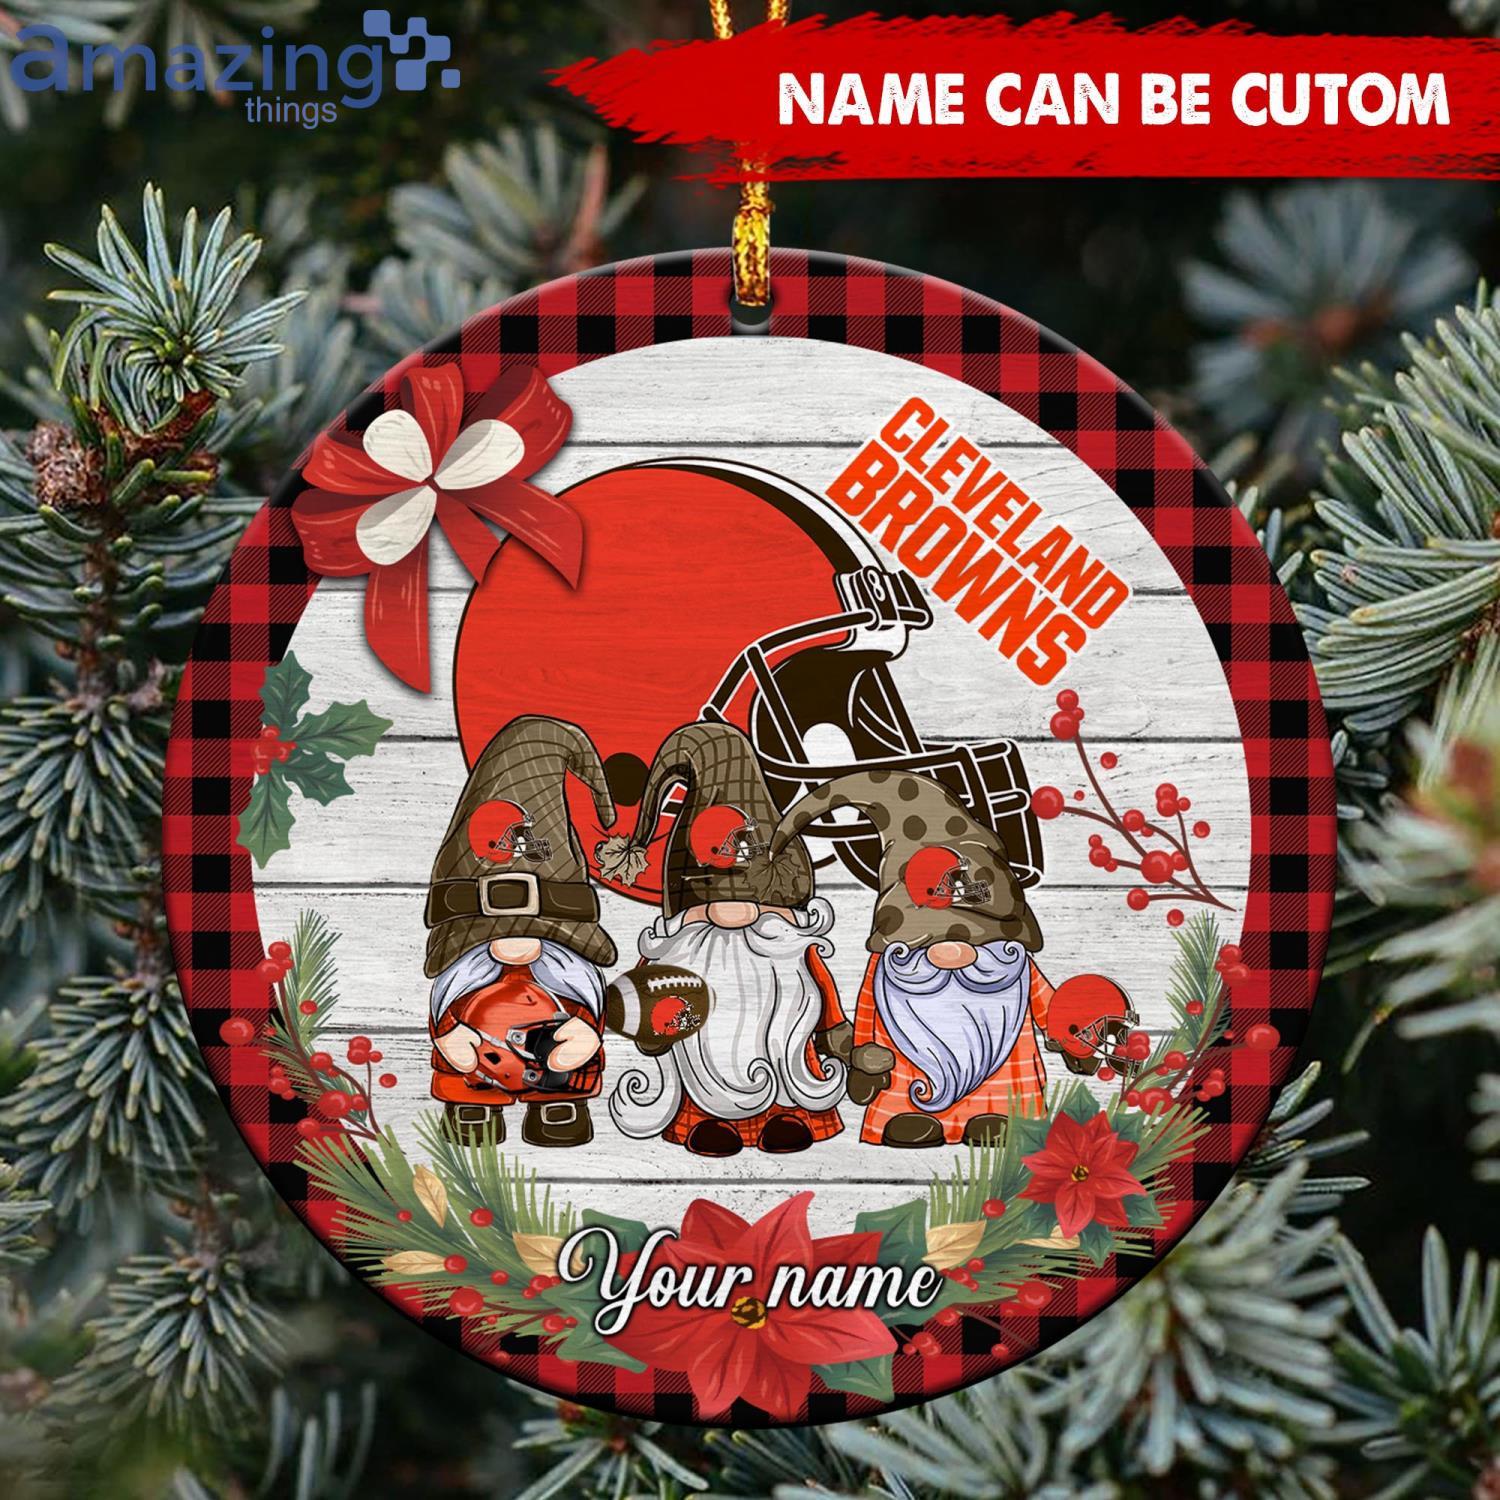 cleveland browns ornaments